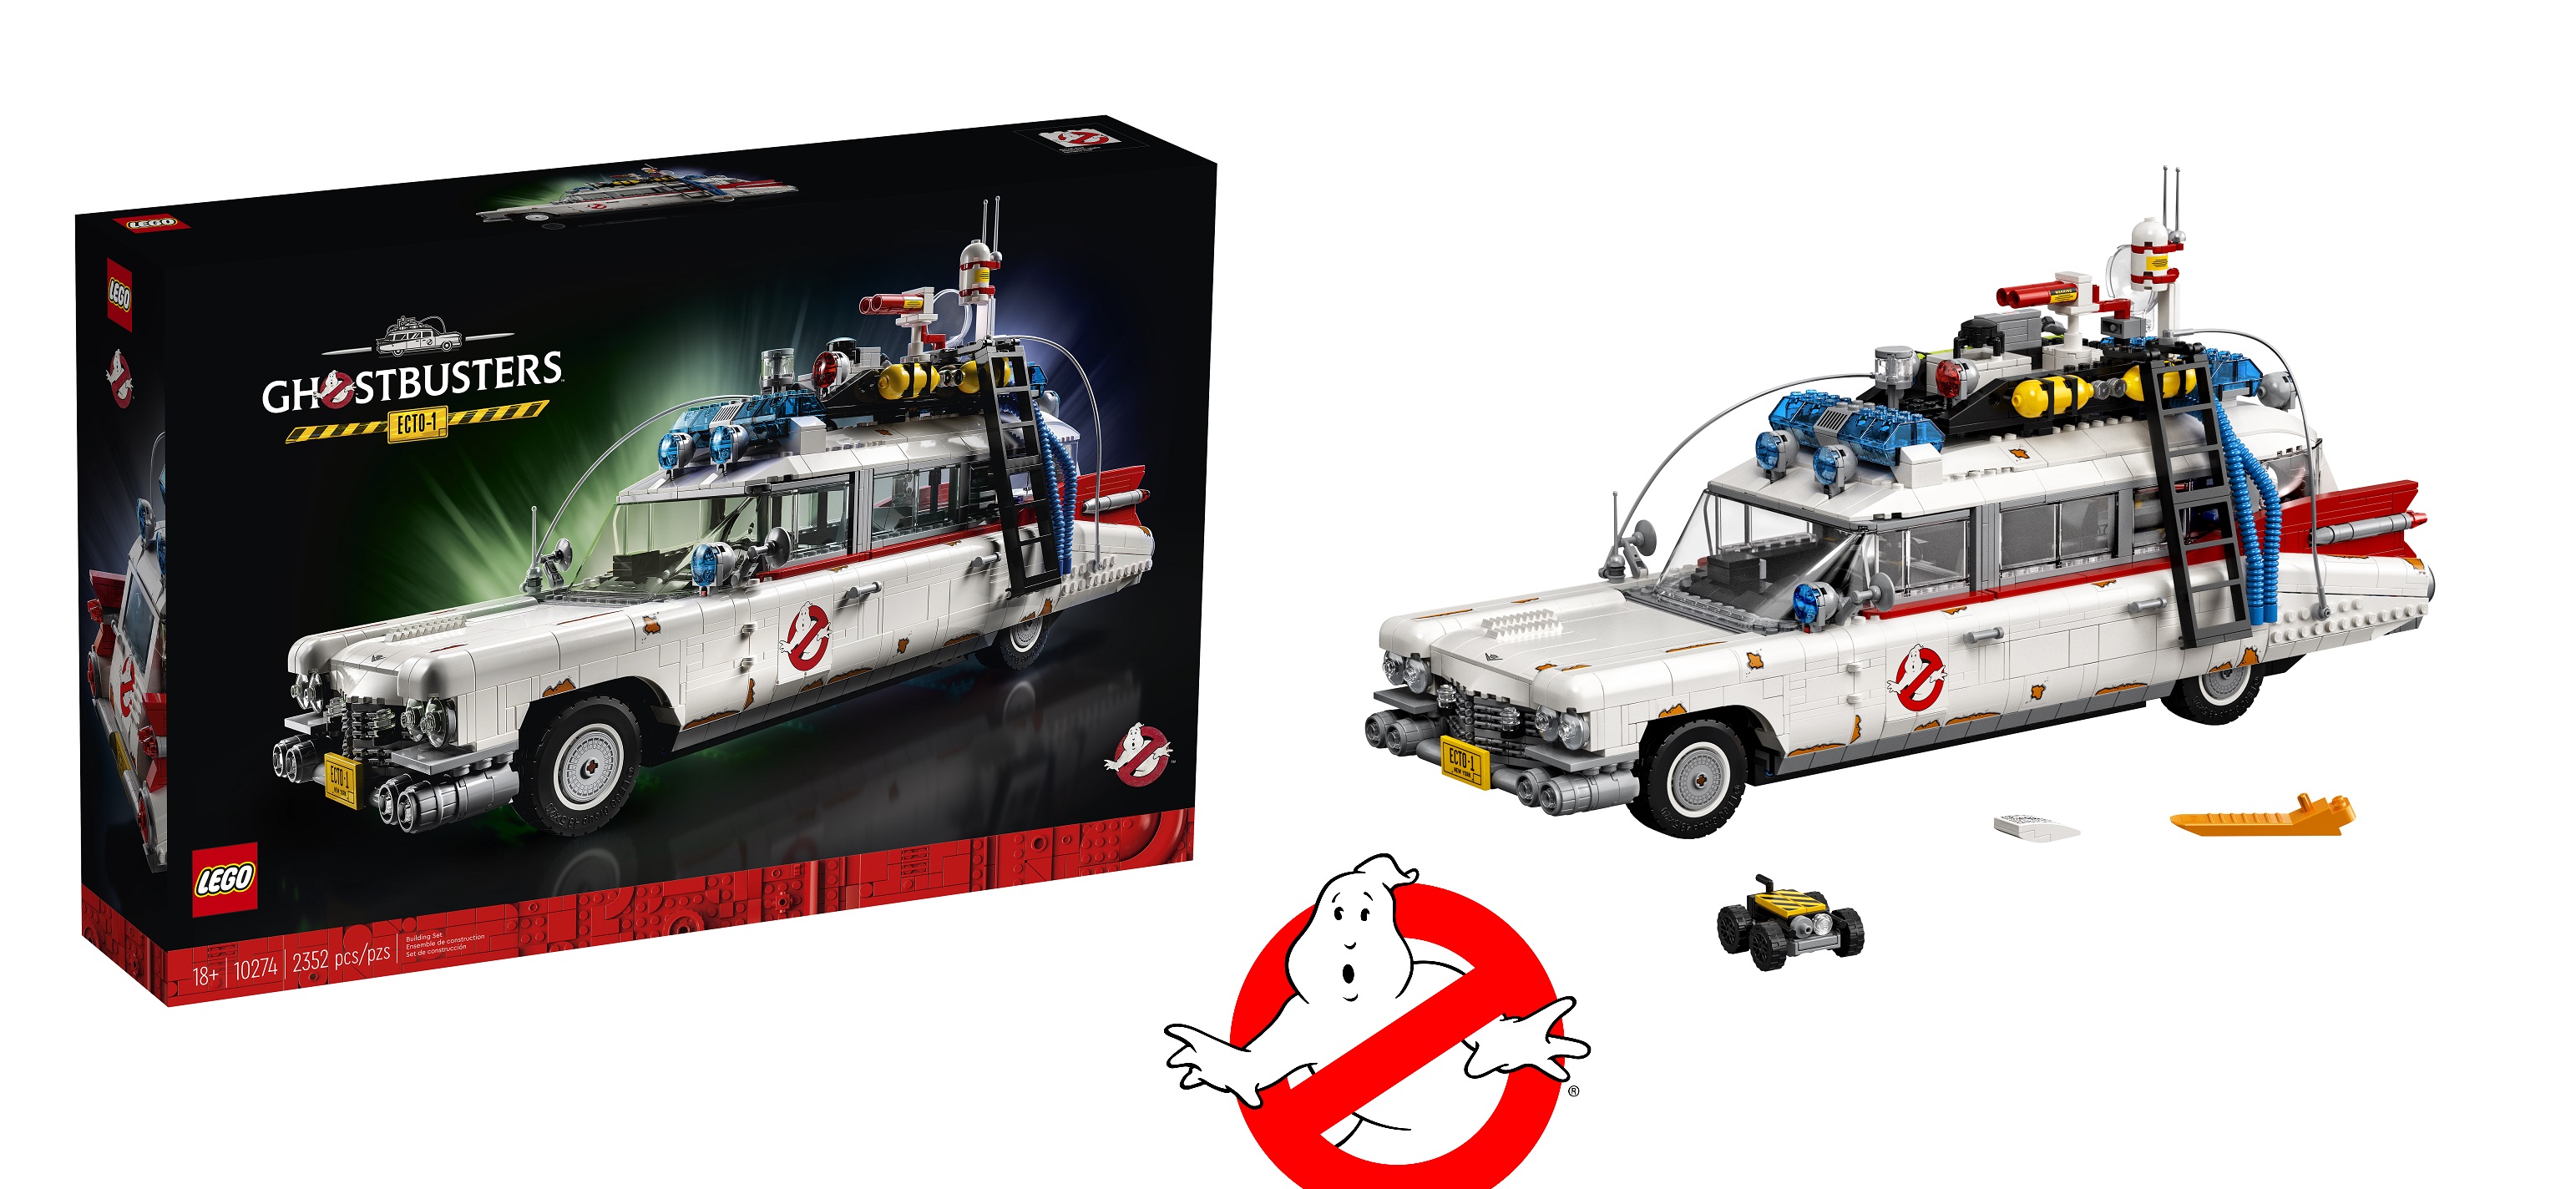 10274 Ghostbusters Ecto-1 (2020) is the ultimate LEGO Ghostbusters